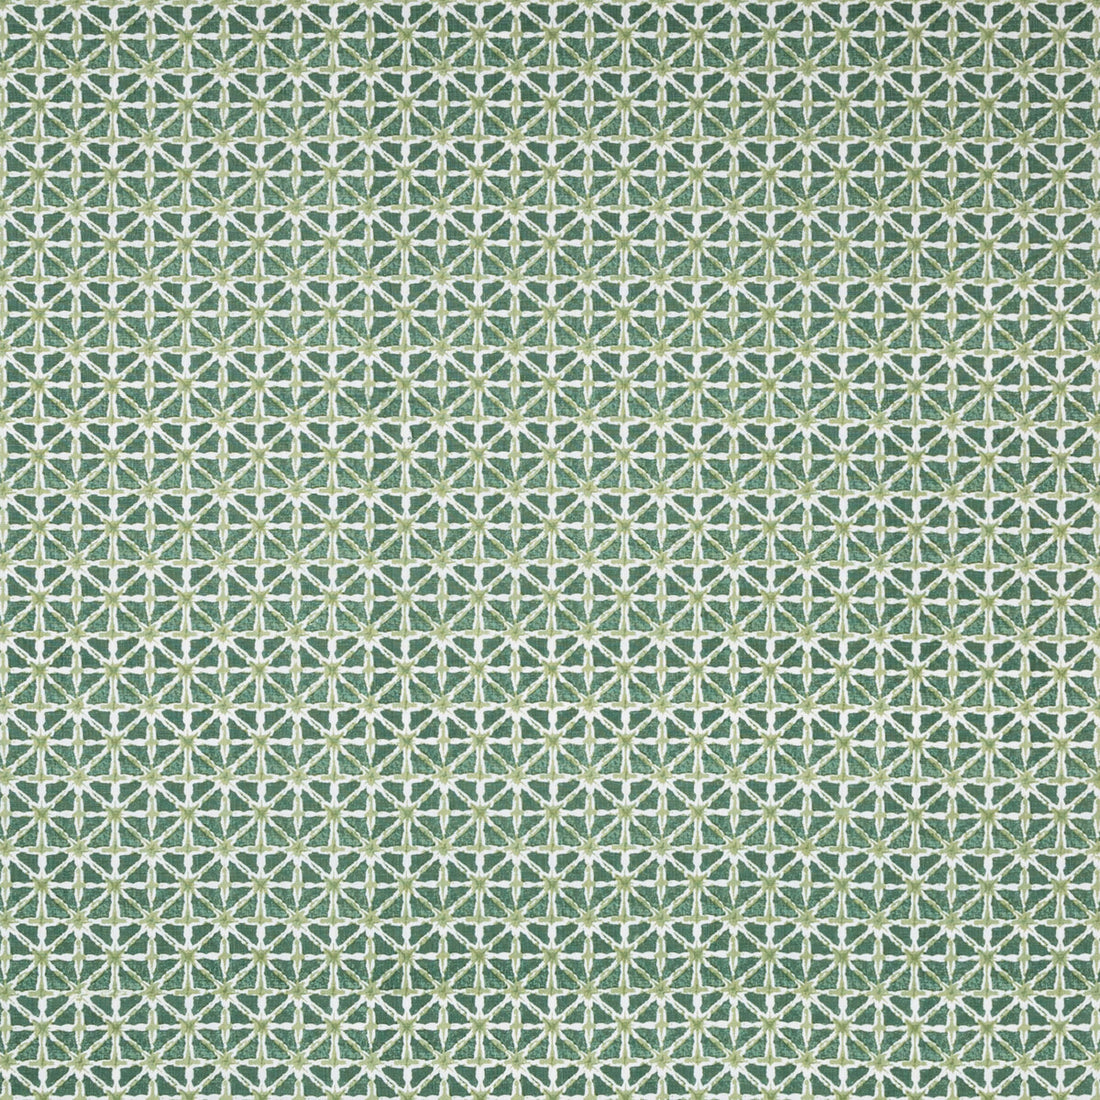 Sylvan Print fabric in aloe color - pattern 2020183.30.0 - by Lee Jofa in the Avondale collection